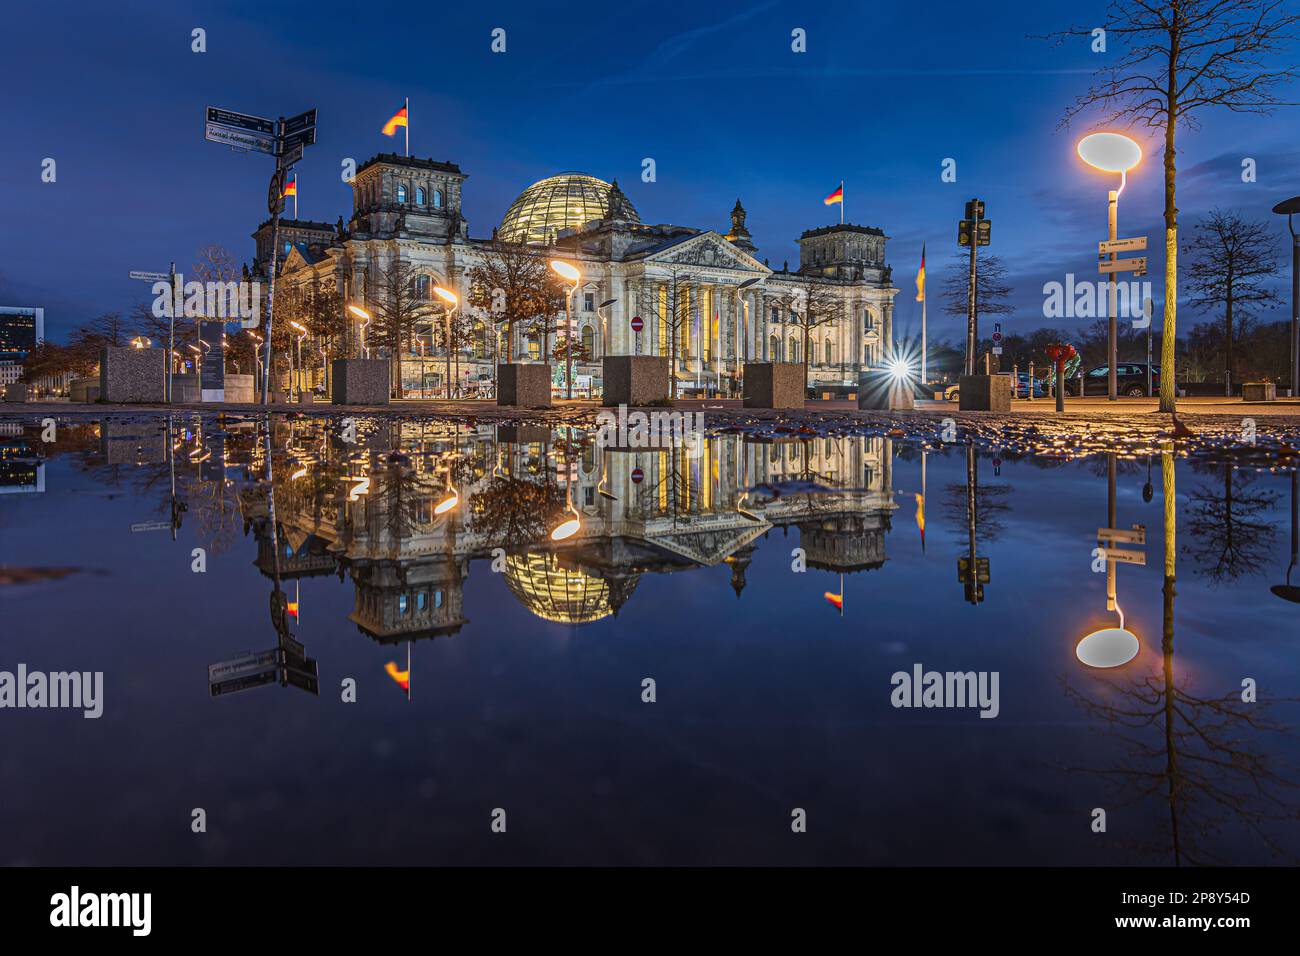 Reichstag in Berlin at the blue hour. Illuminated buildings and street lamps in the evening. Reflection of building on water surface. Evening mood Stock Photo